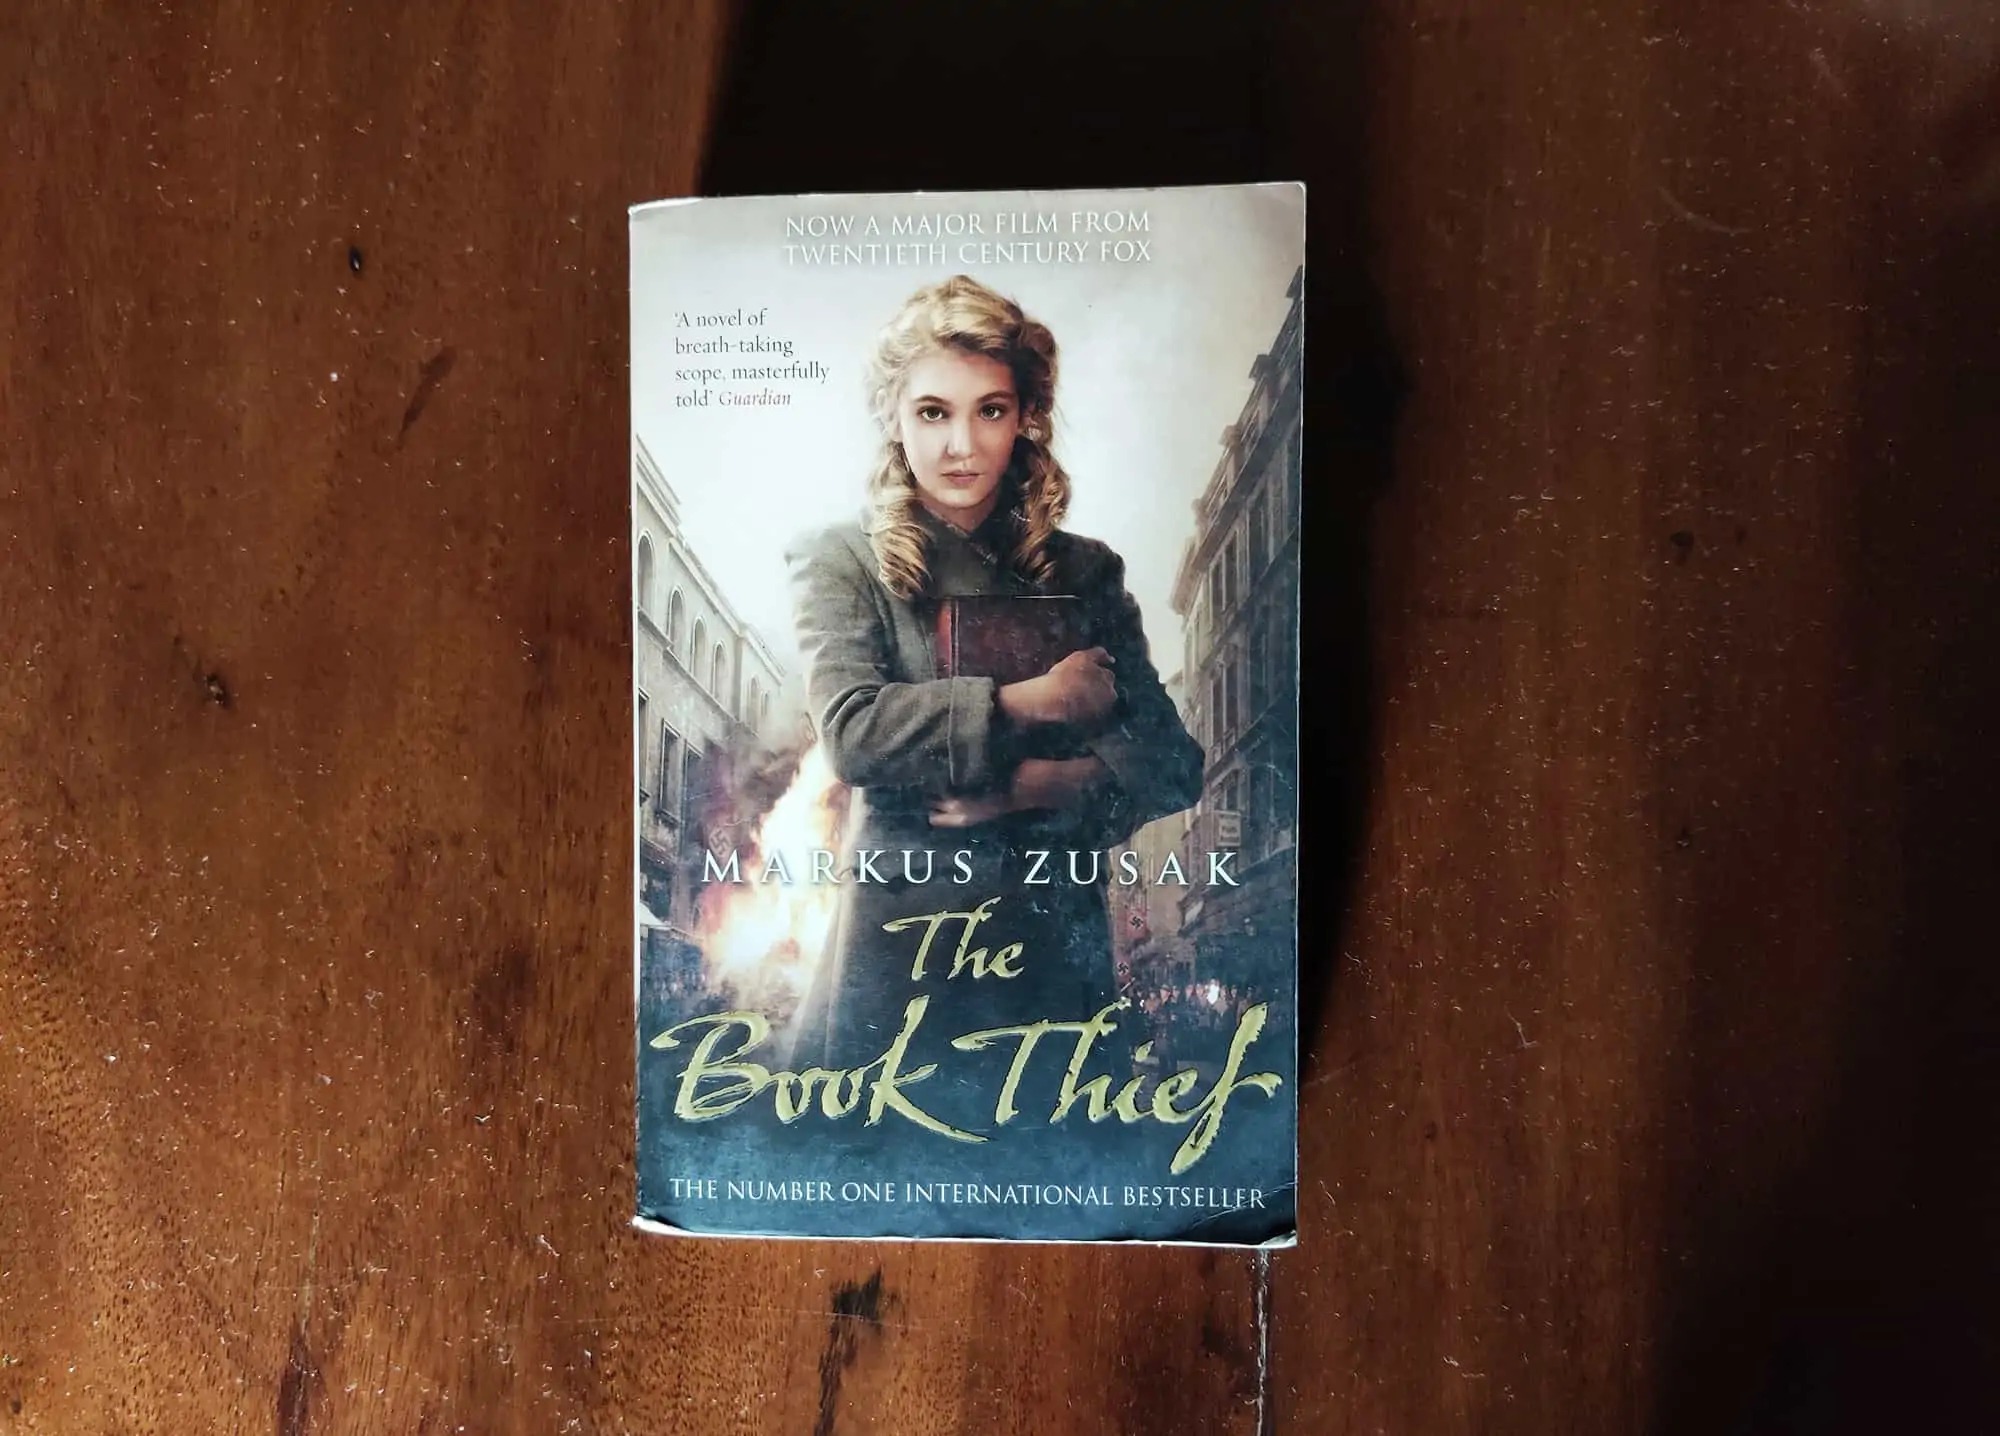 The Book Thief – Celebrating Humanity in Nazi Germany!